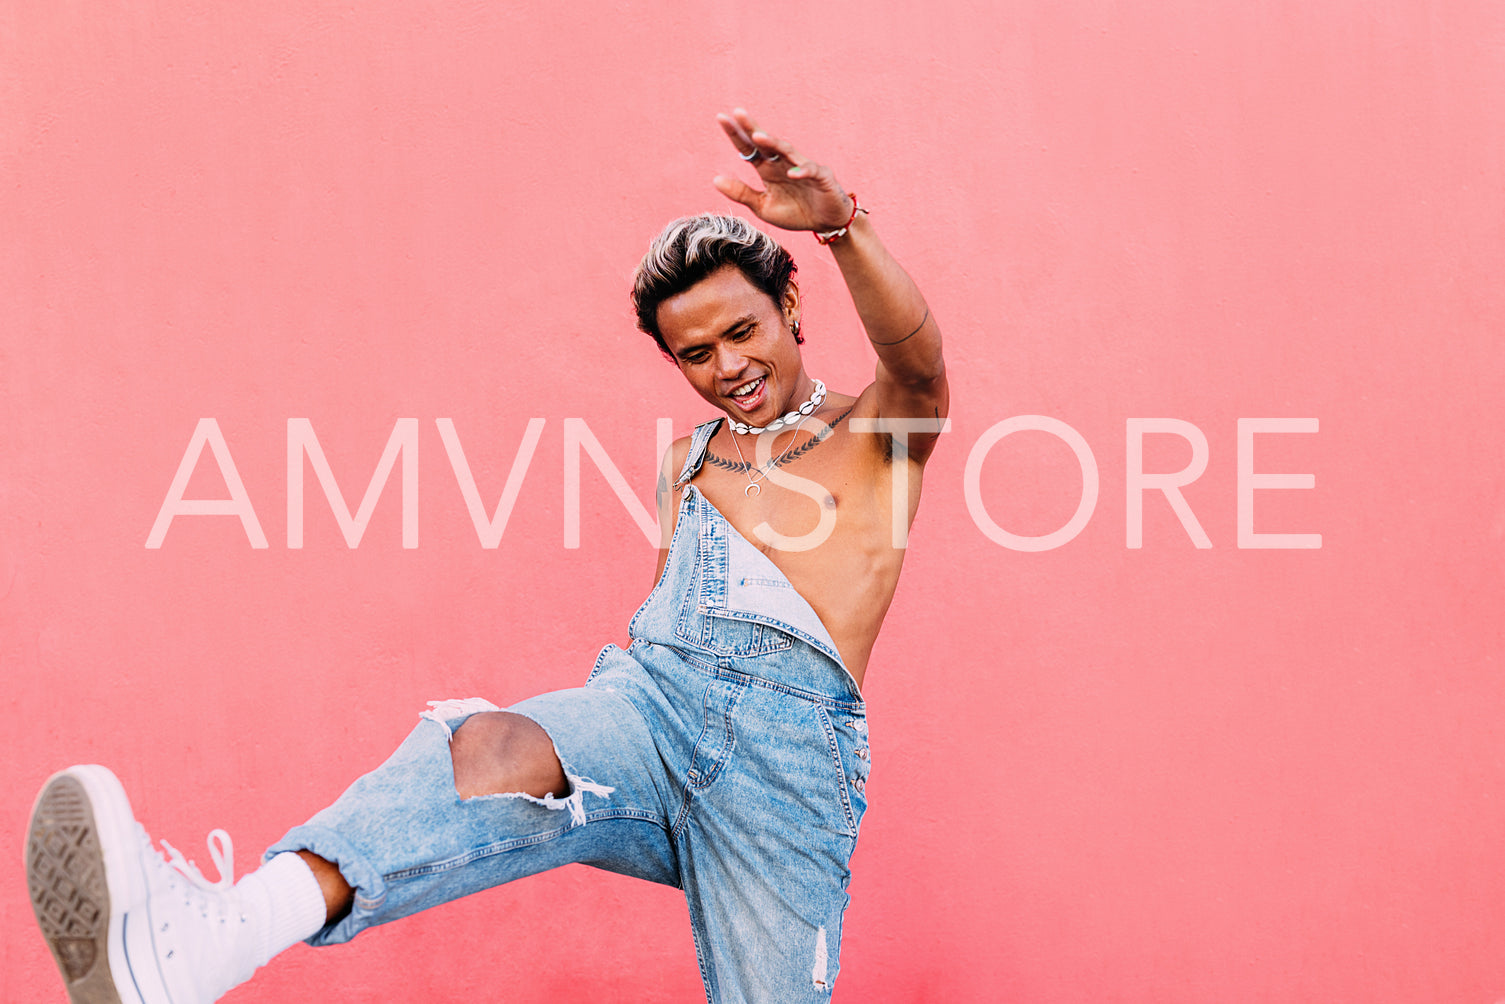 Smiling guy in denim overalls having fun outdoors against pink wall